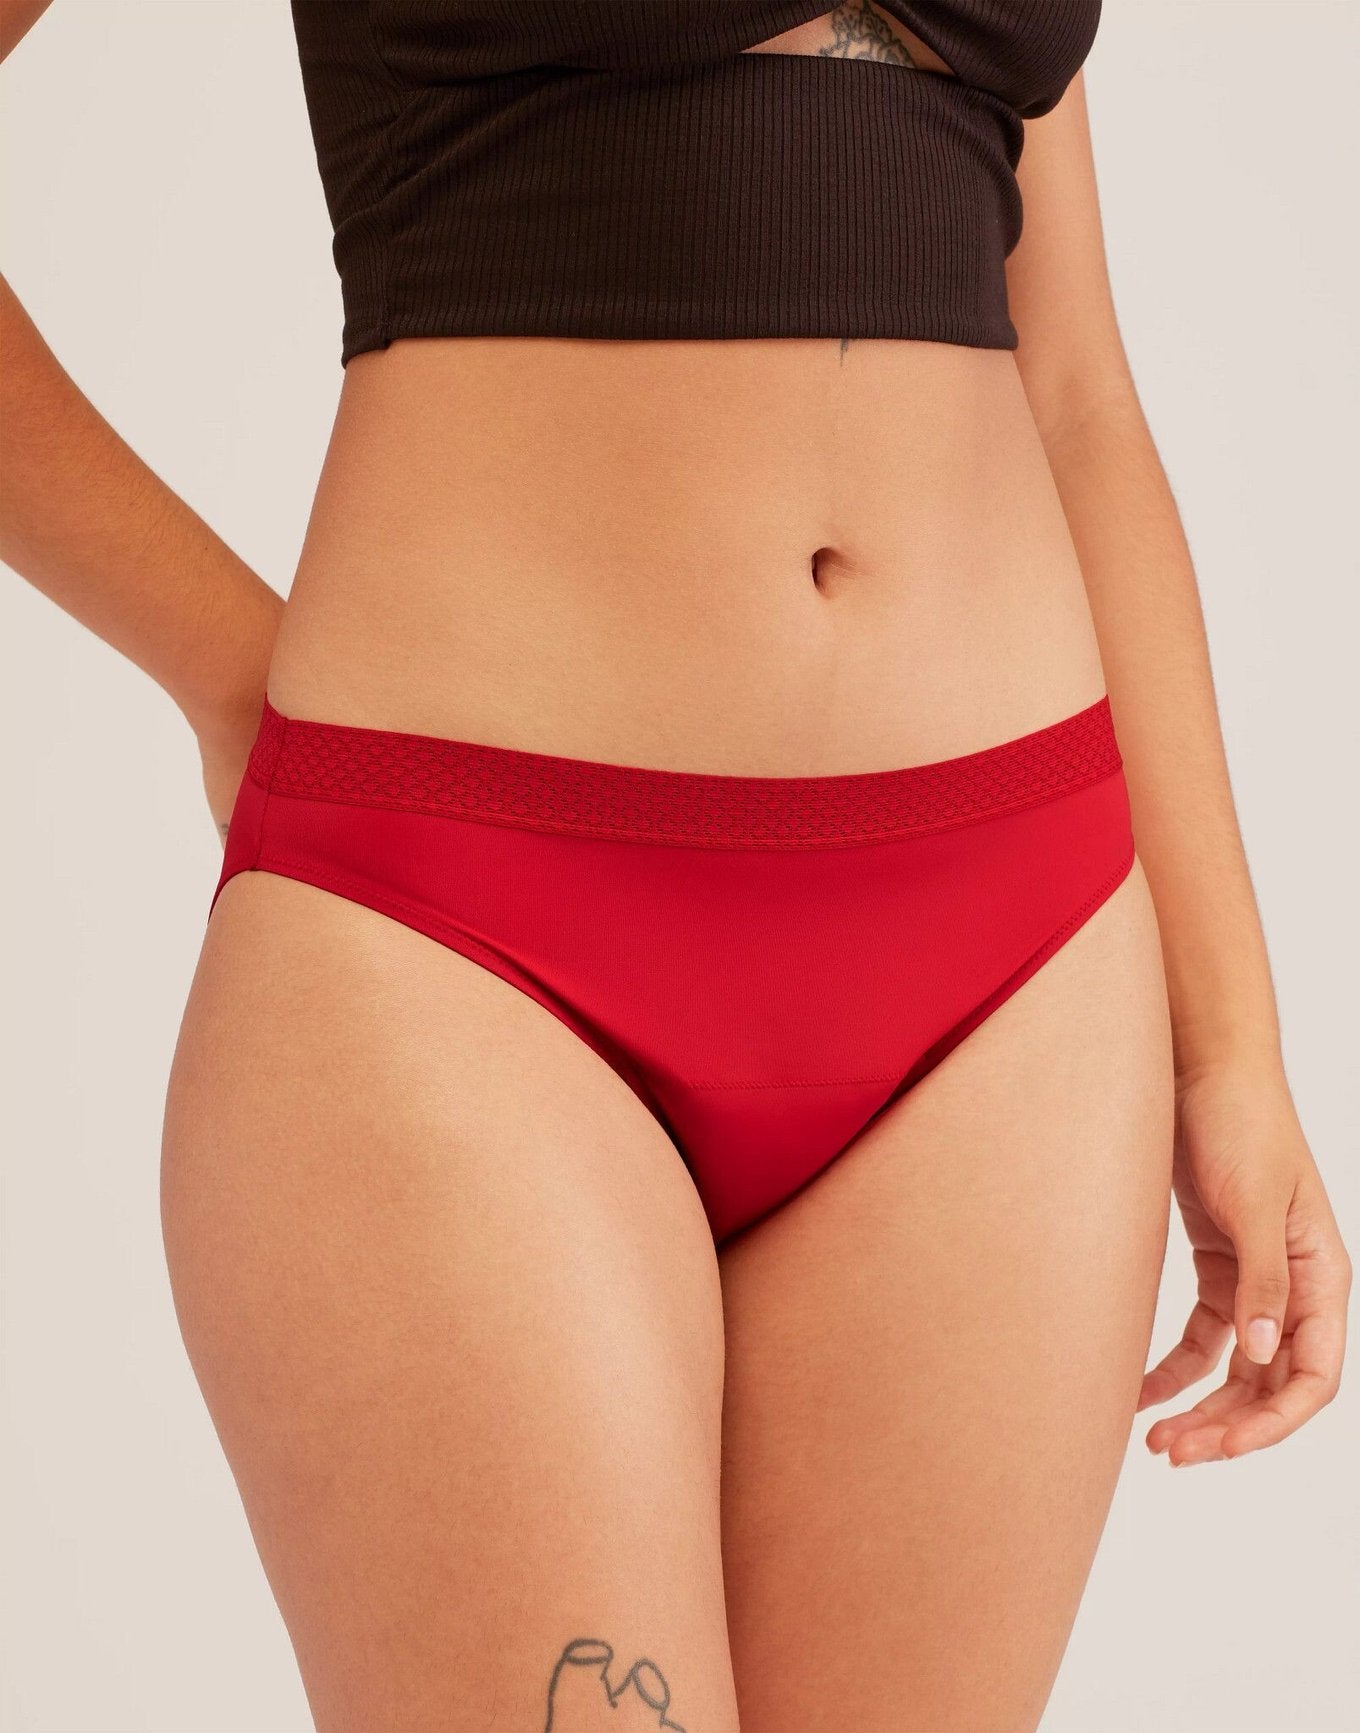 Adore Me Women's Averly Brazilian Panty L / Barbados Cherry Red. : Target